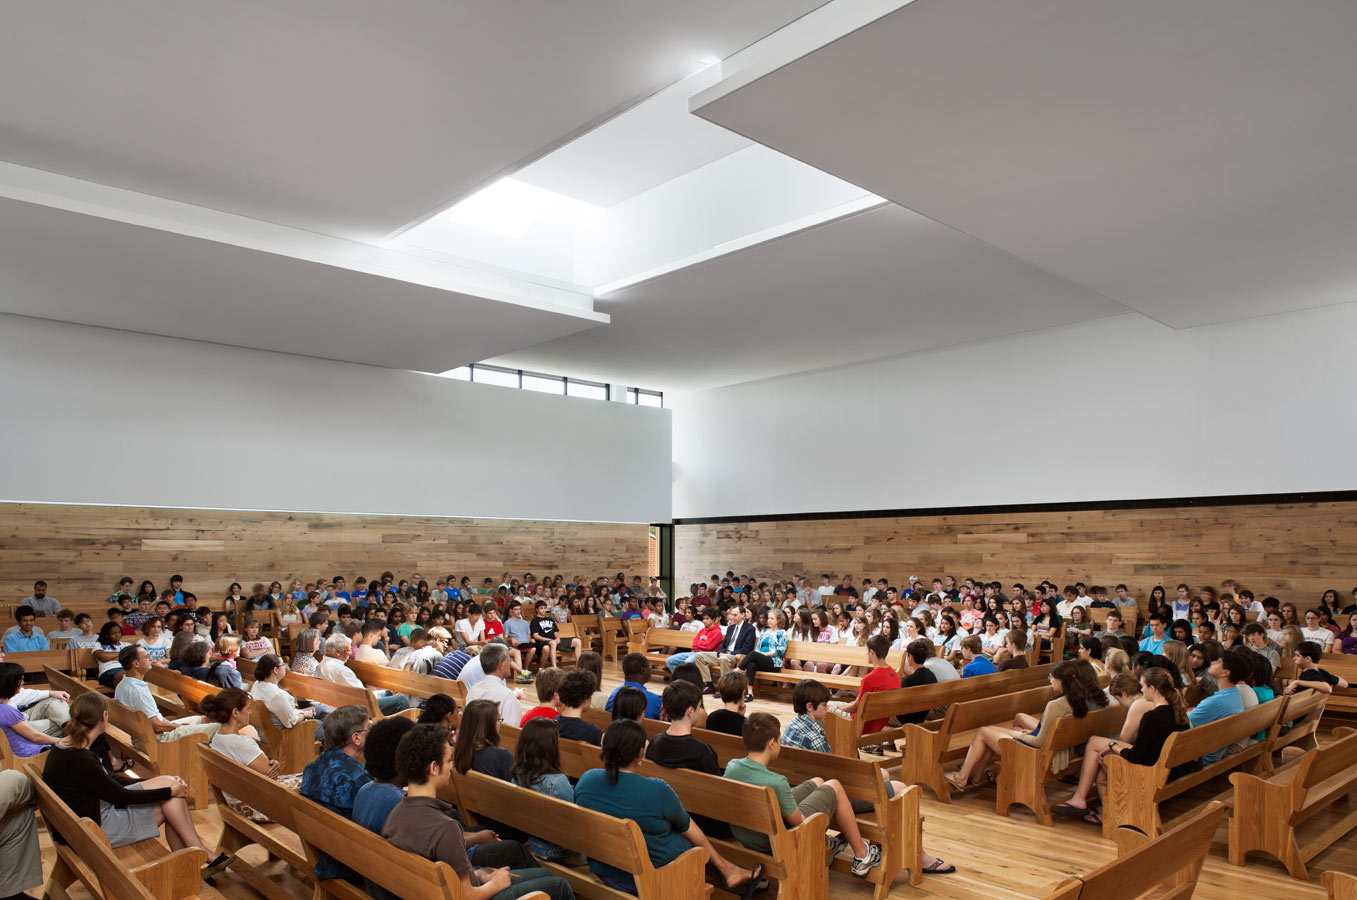 <p>The Meeting House is designed to filter light, views, and sounds from the surge of activity around the center of the campus. Panels on the ceiling are arranged in a pinwheel pattern around a central skylight, a void of light around which form and order are created. <br><small>&copy; Michael Moran/OTTO</small></p>